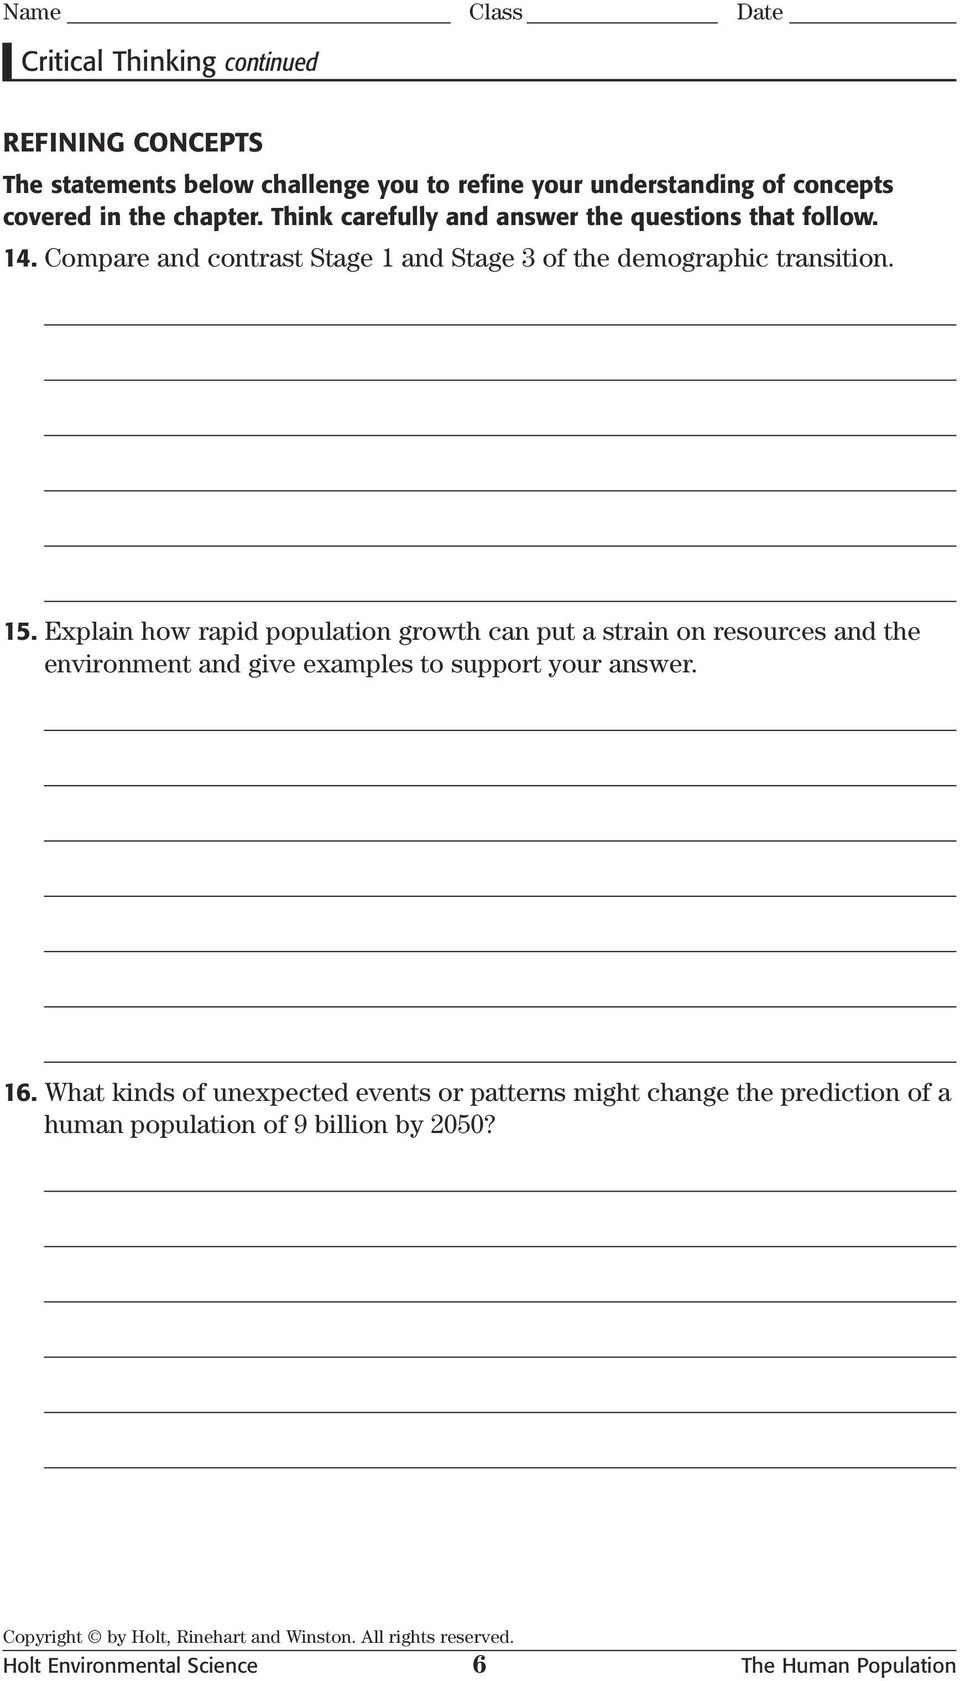 critical thinking worksheets for grade 4